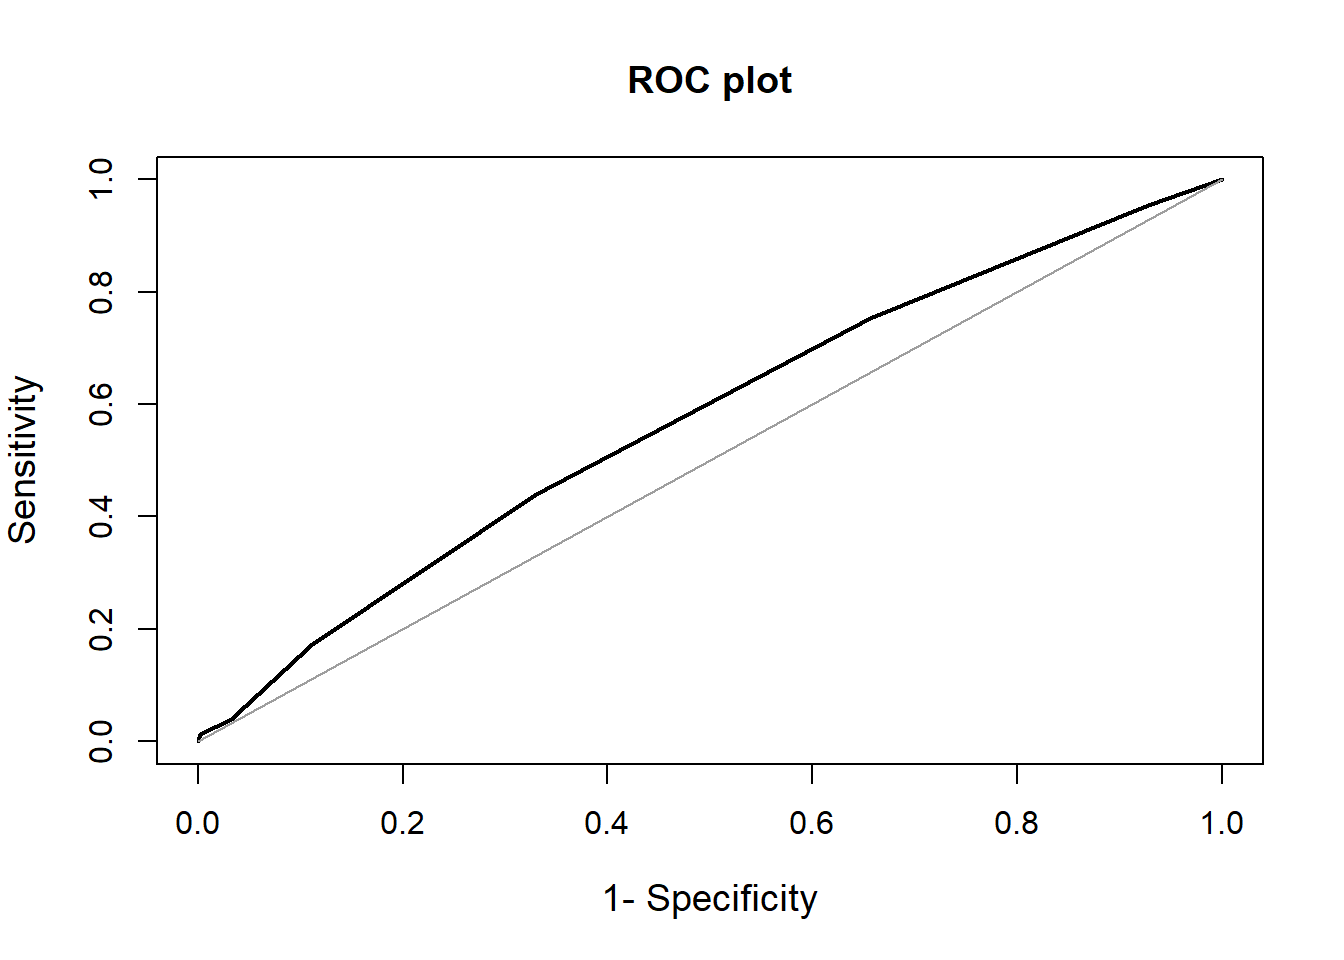 ROC curve of the genetic score used to predict case/control status in the asthma example.